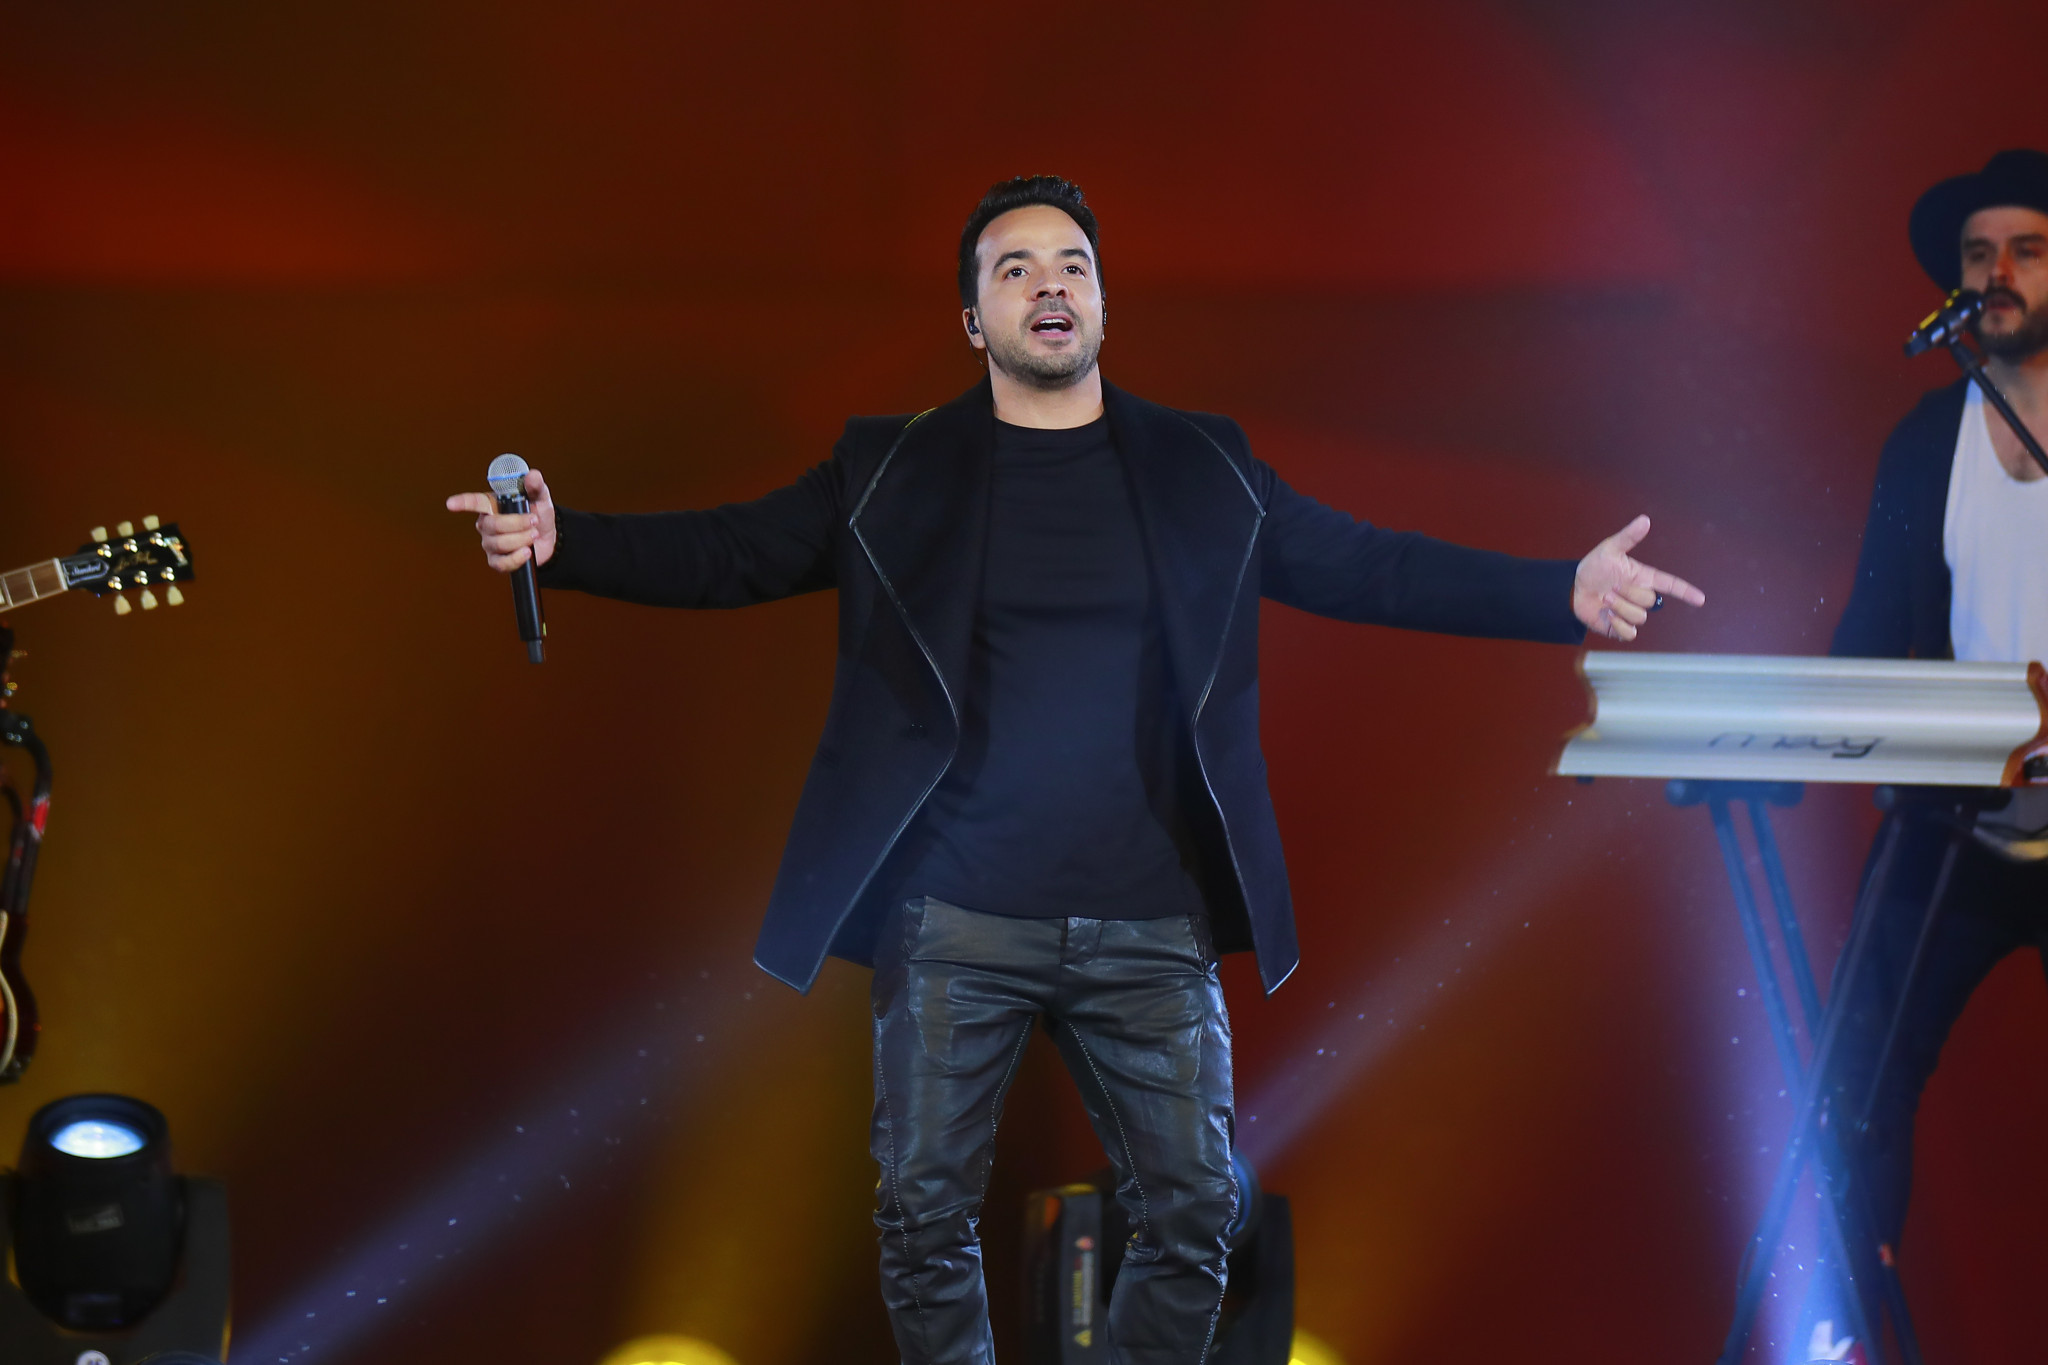 Luis Fonsi's performance at the Opening Ceremony had the potential of attracting new Pan American Games viewers ©Lima 2019